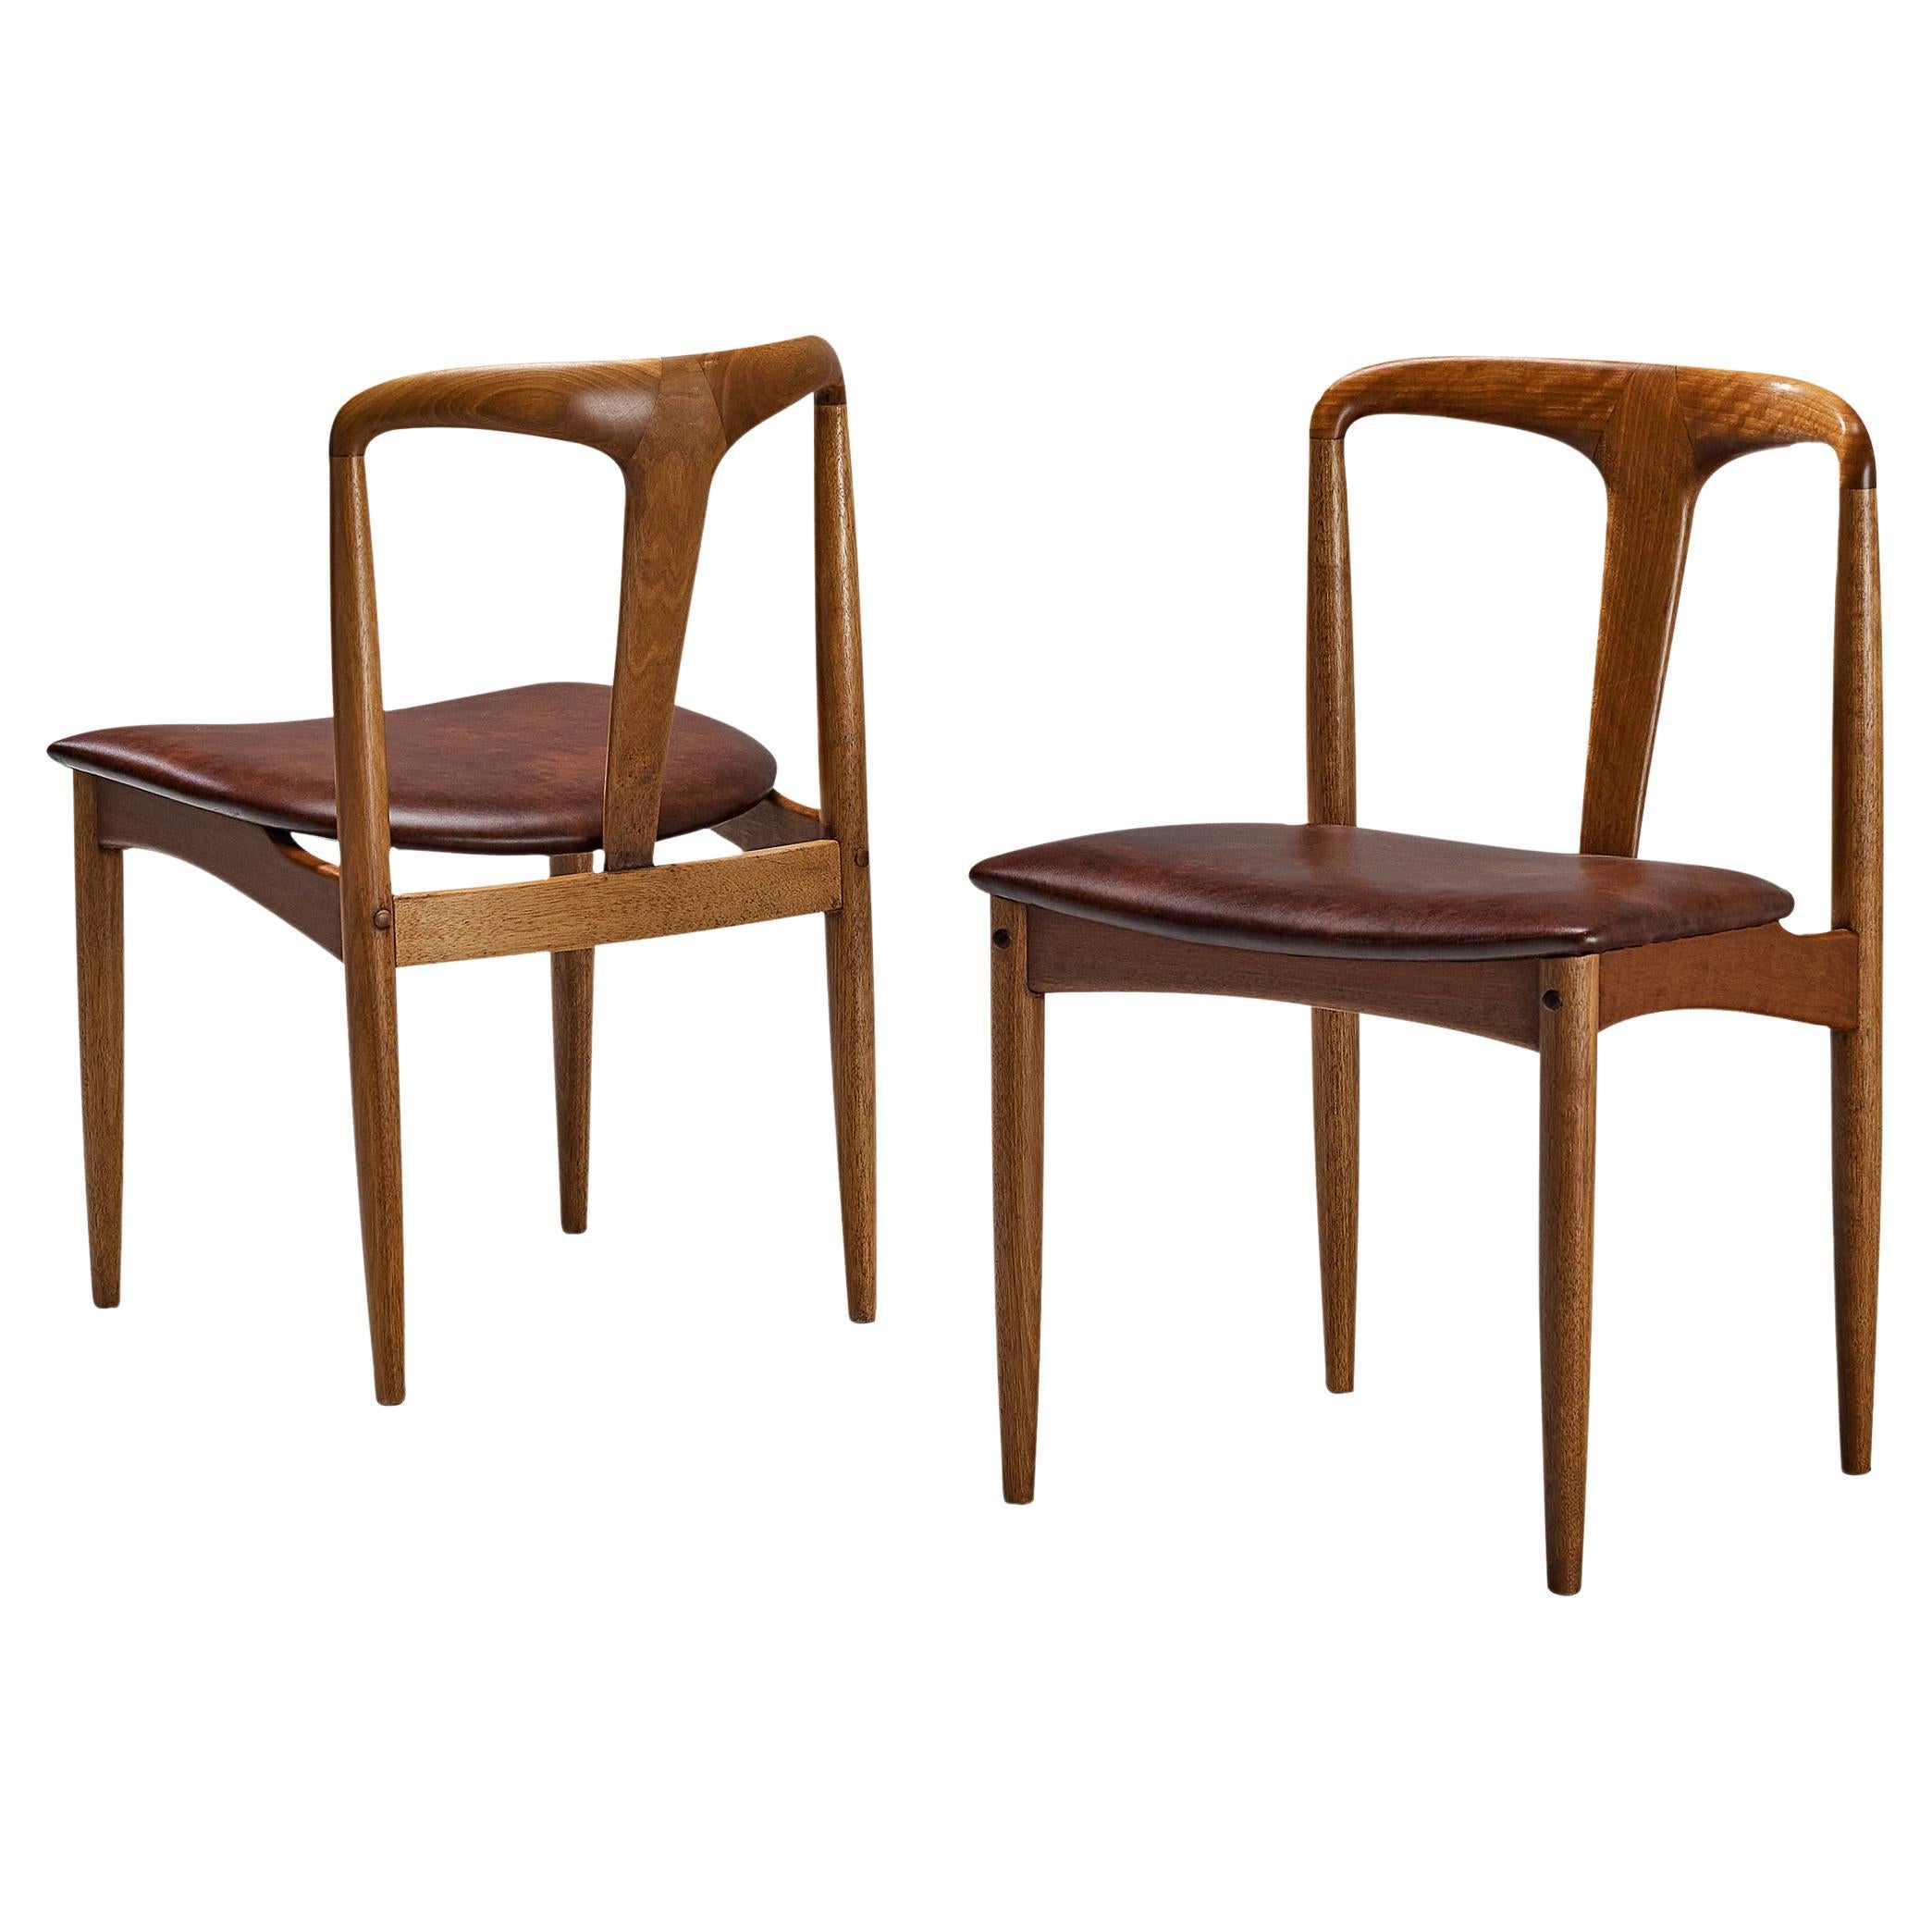 Johannes Andersen Pair of 'Juliane' Dining Chairs in Teak and Leather